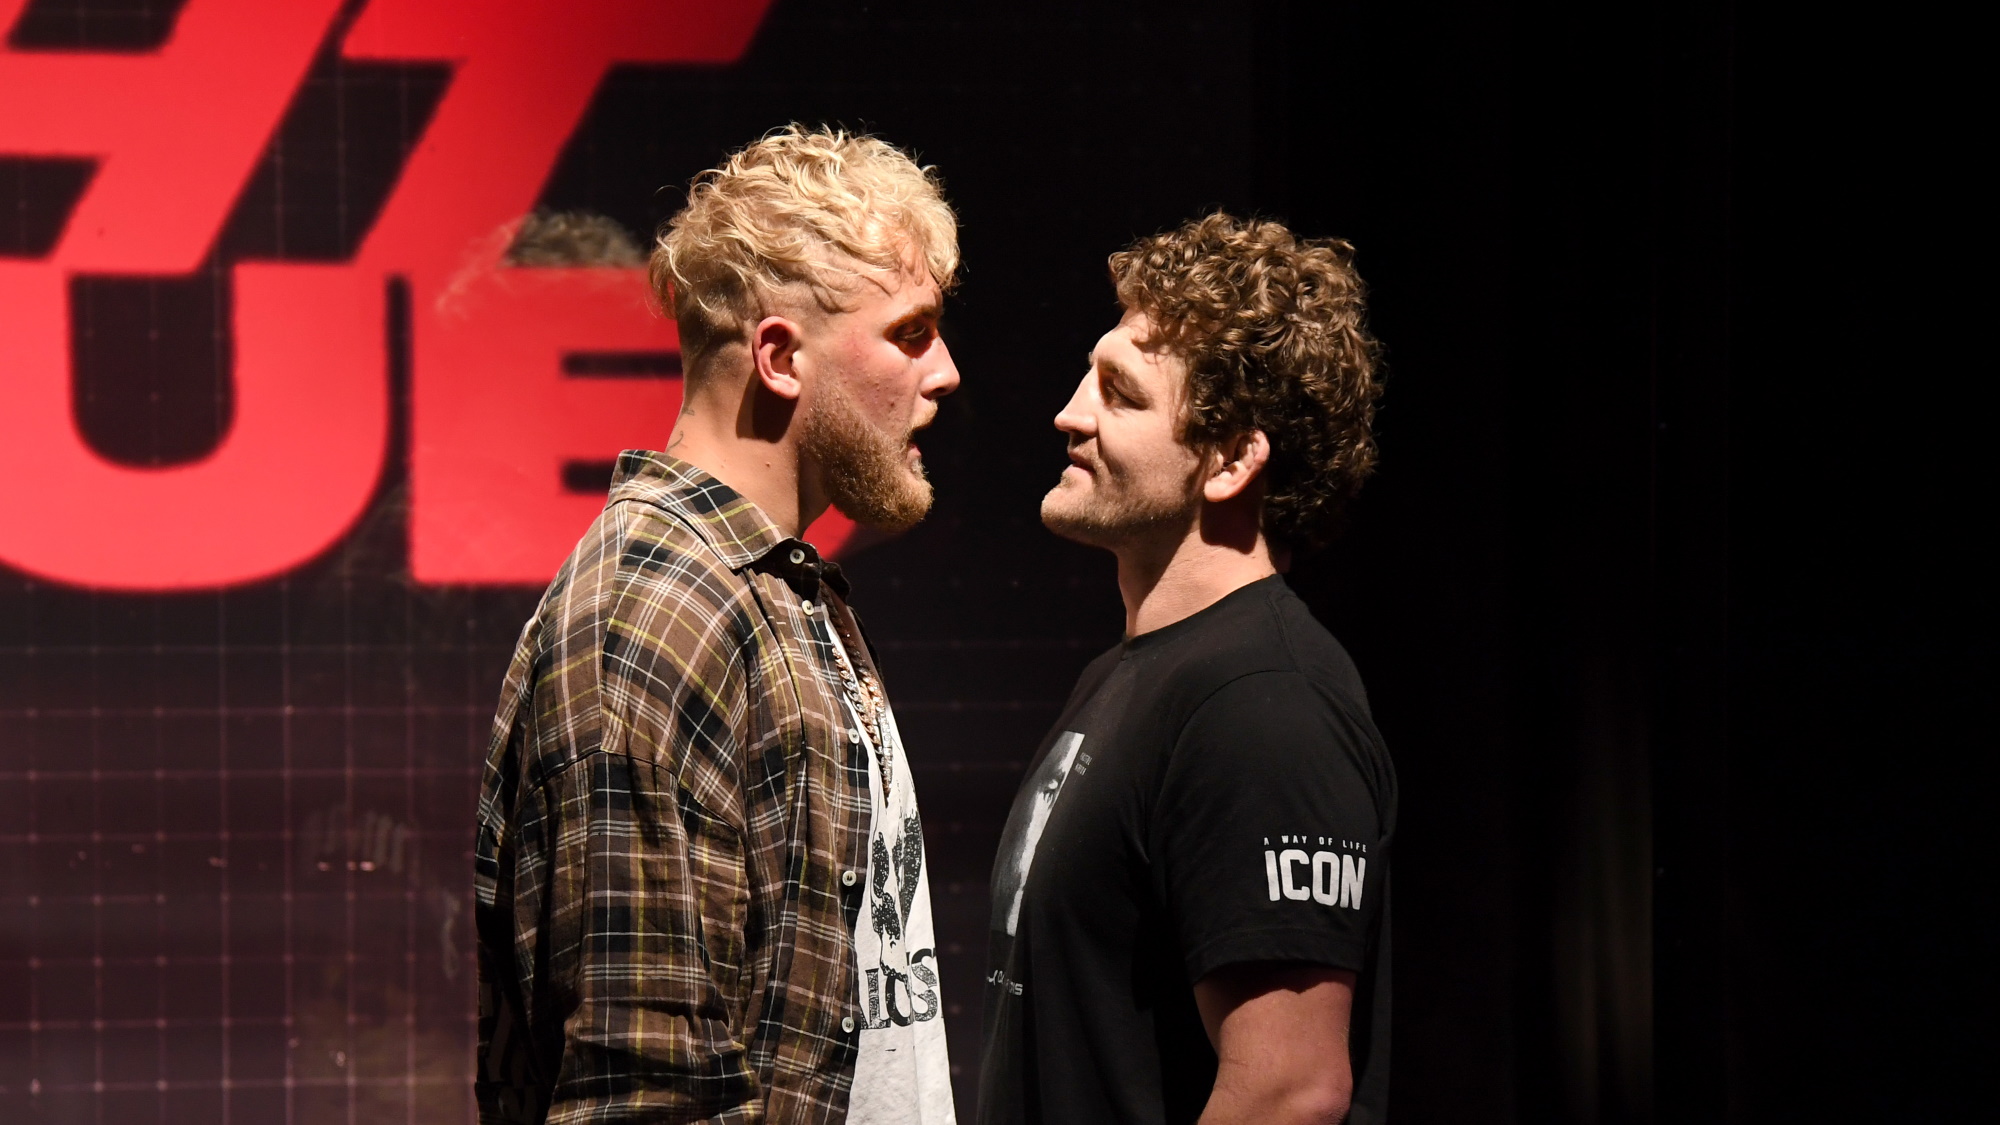 Jake Paul vs Ben Askren live stream how to watch Bieber, Snoop and fight from anywhere TechRadar